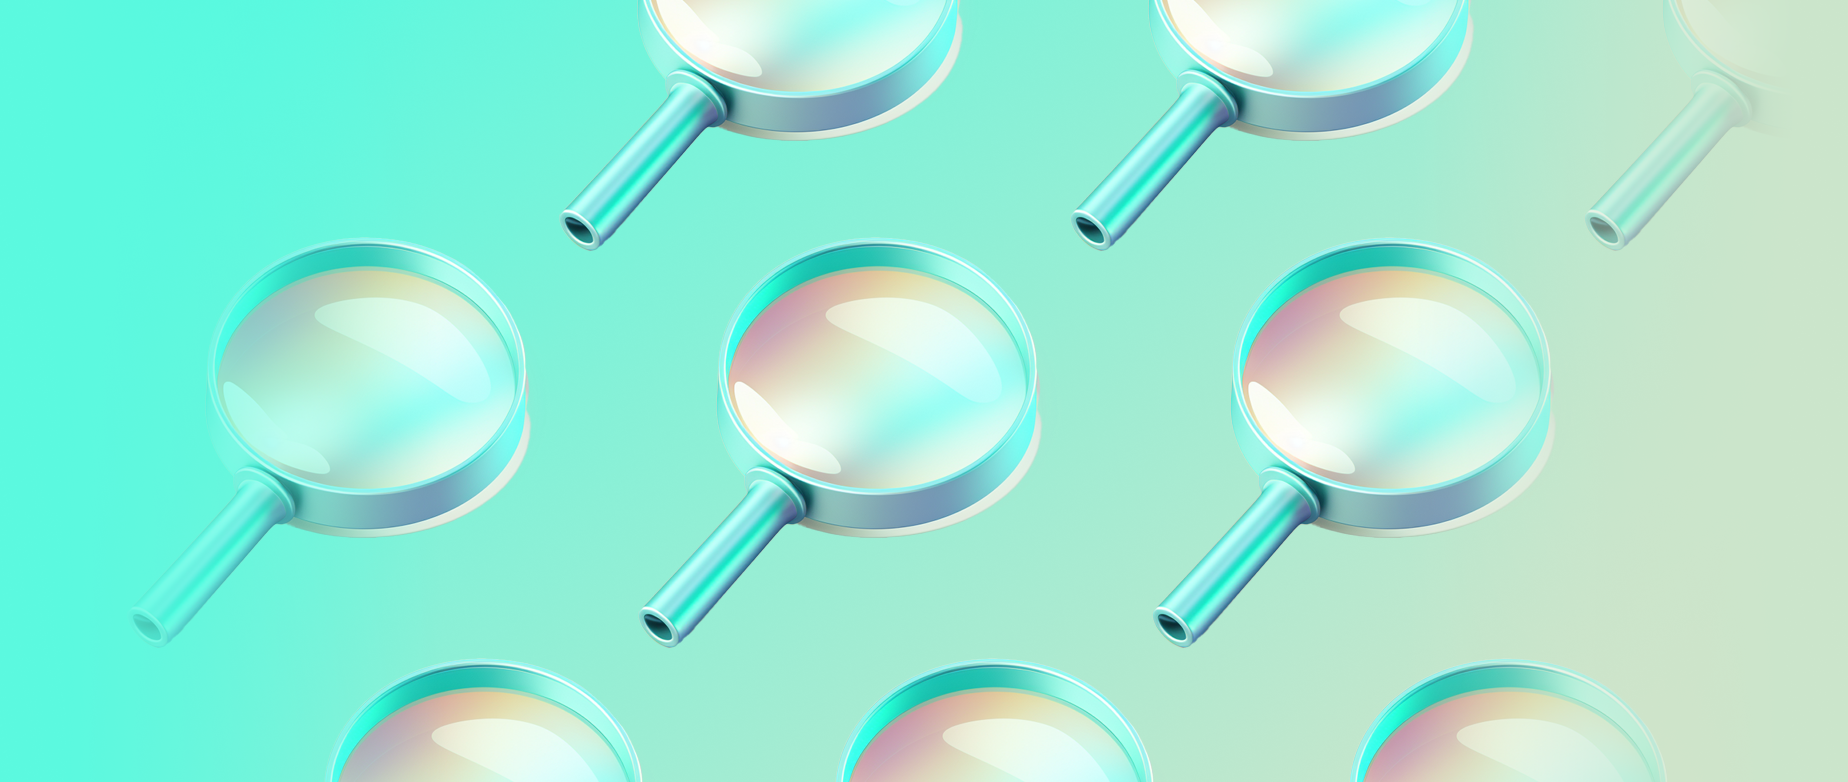 An array of magnifying glasses on a teal background.